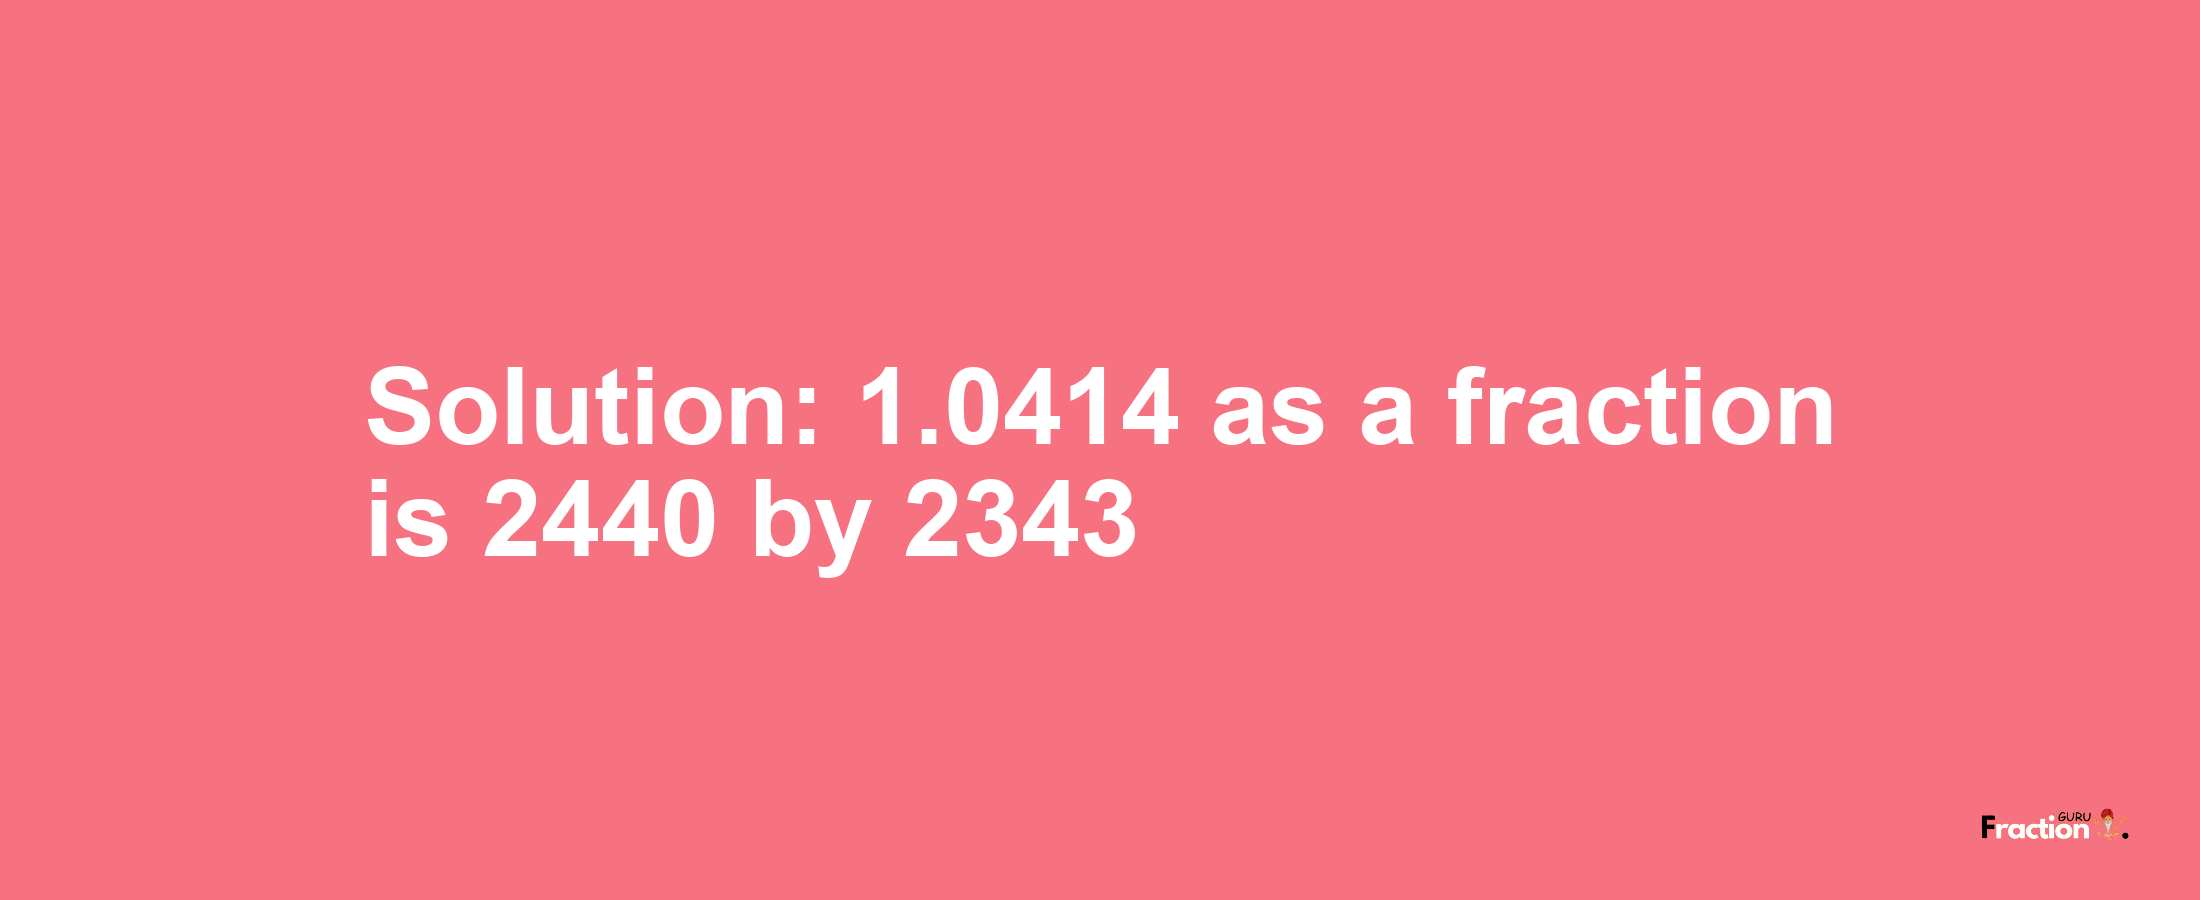 Solution:1.0414 as a fraction is 2440/2343